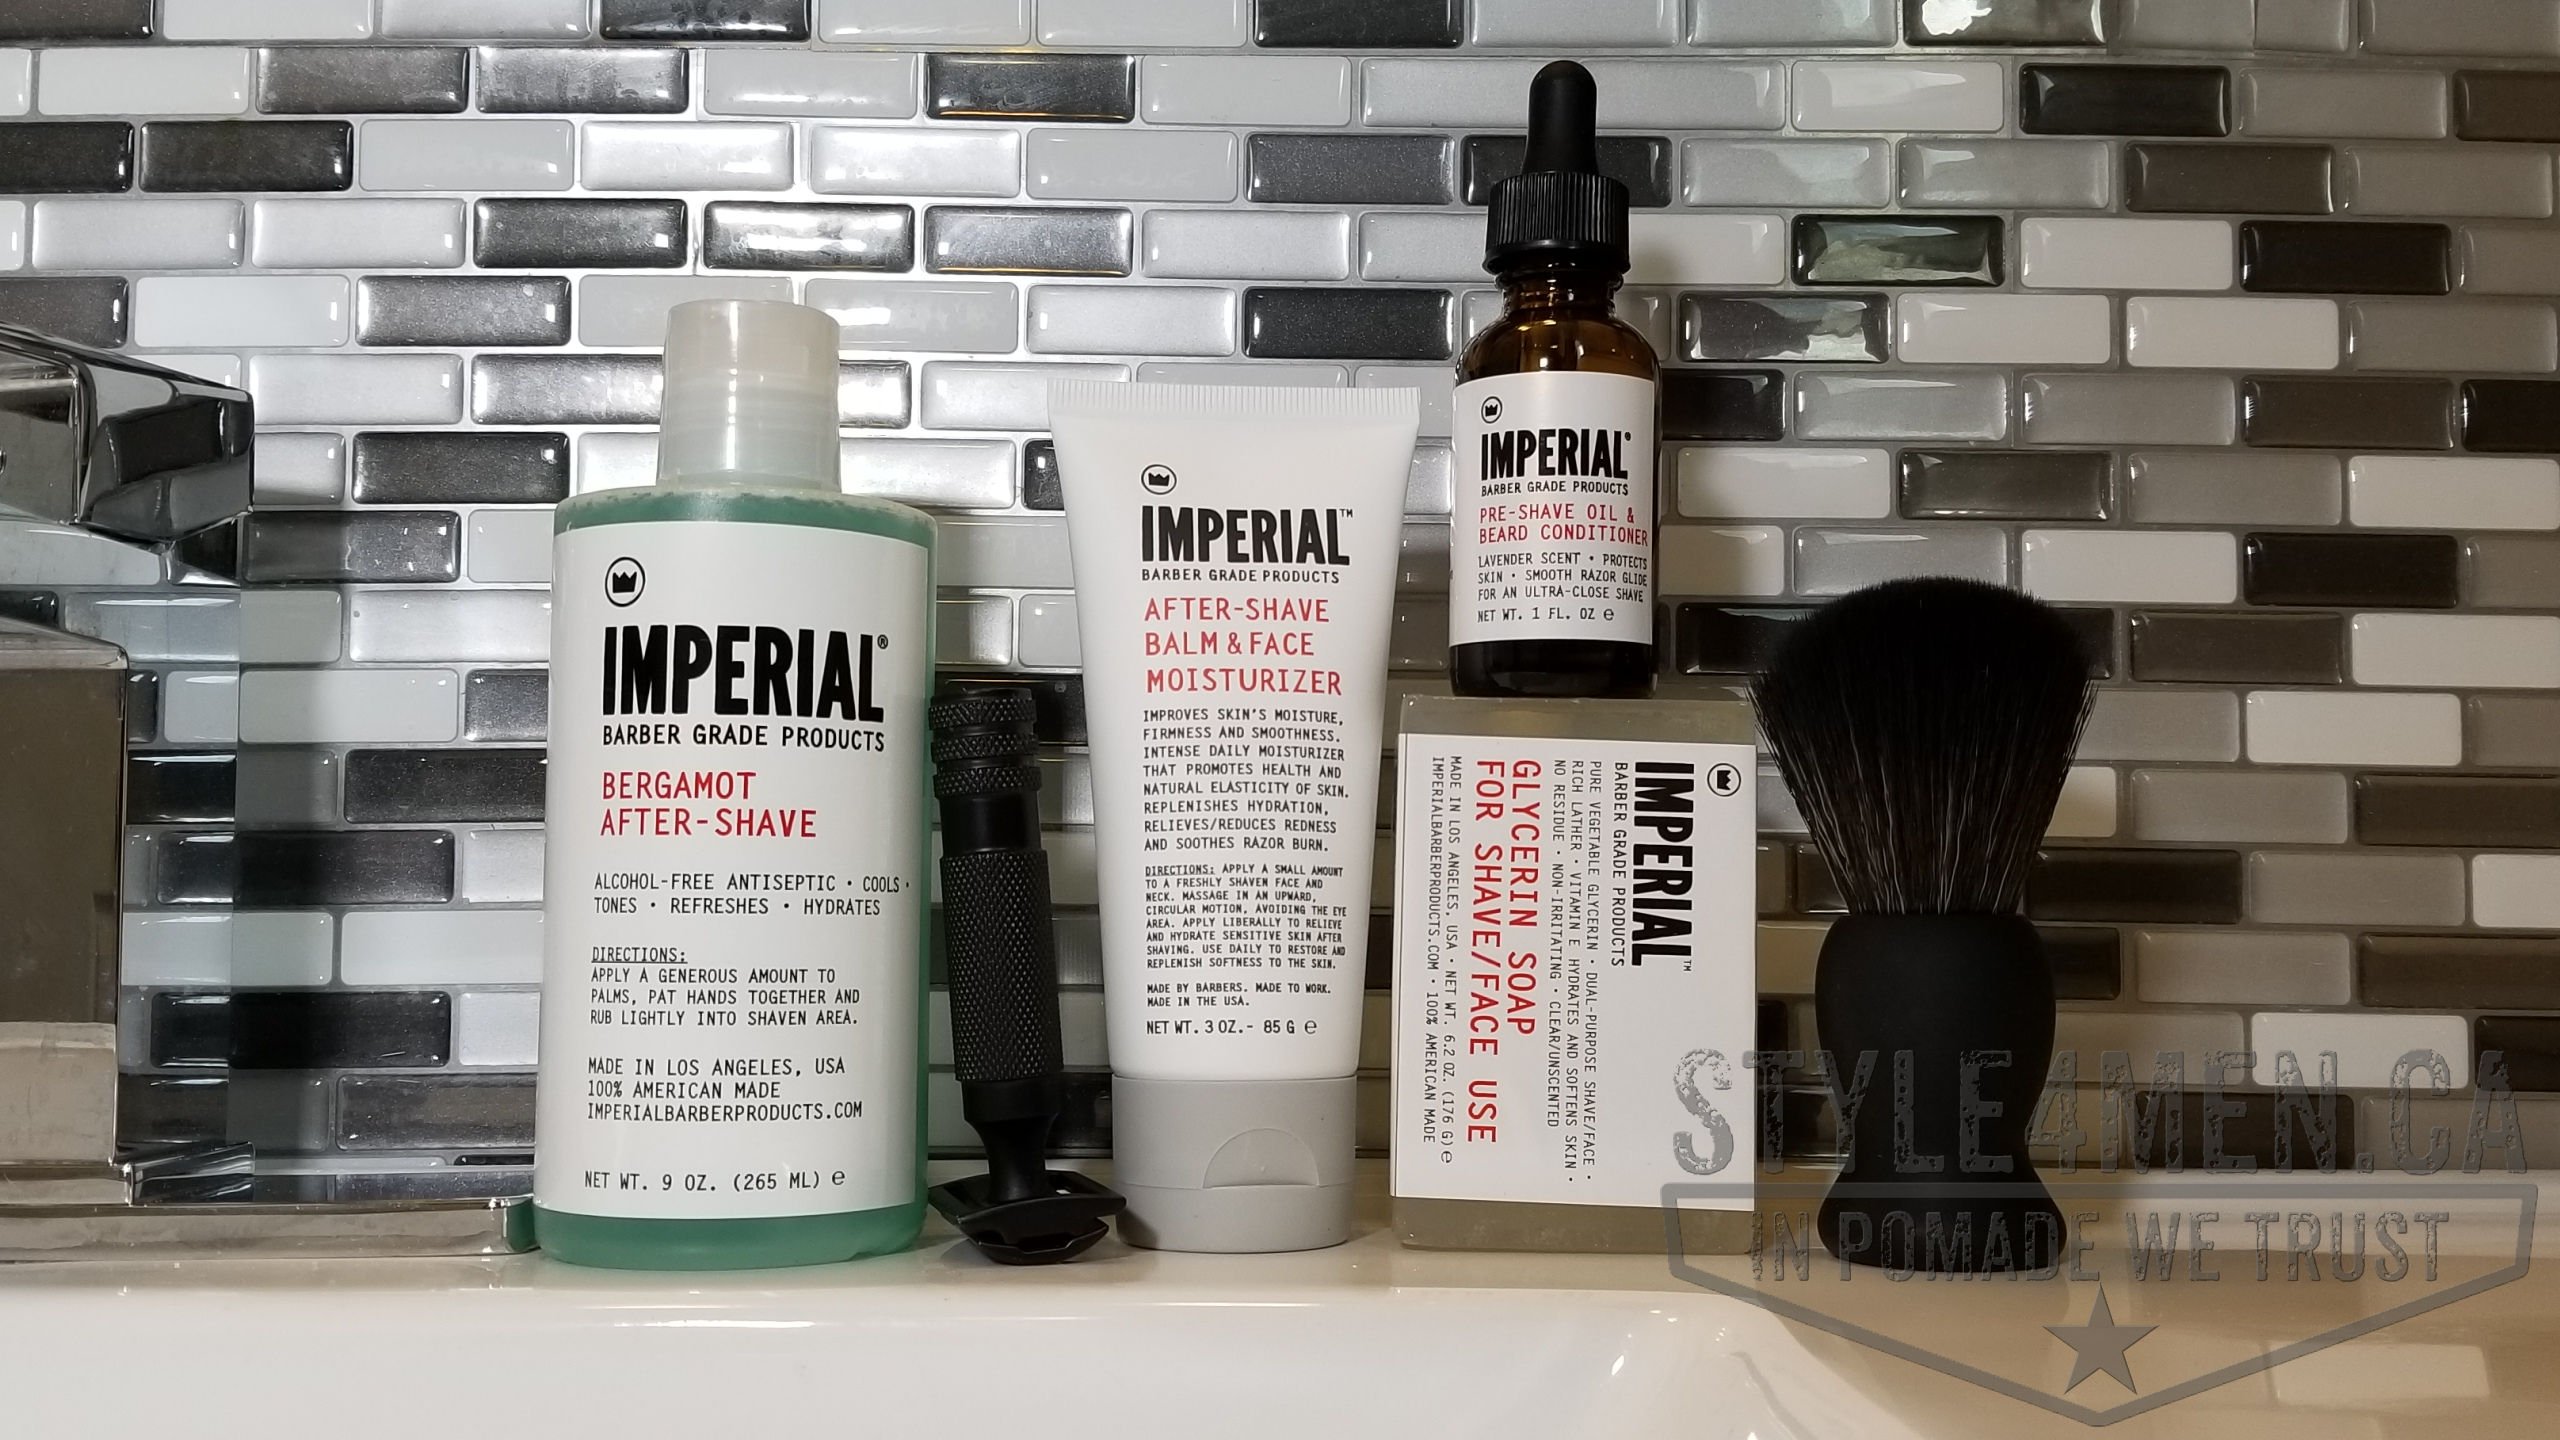 IMPERIAL Barber Grade Products – Offering an Impressive Shave Suite